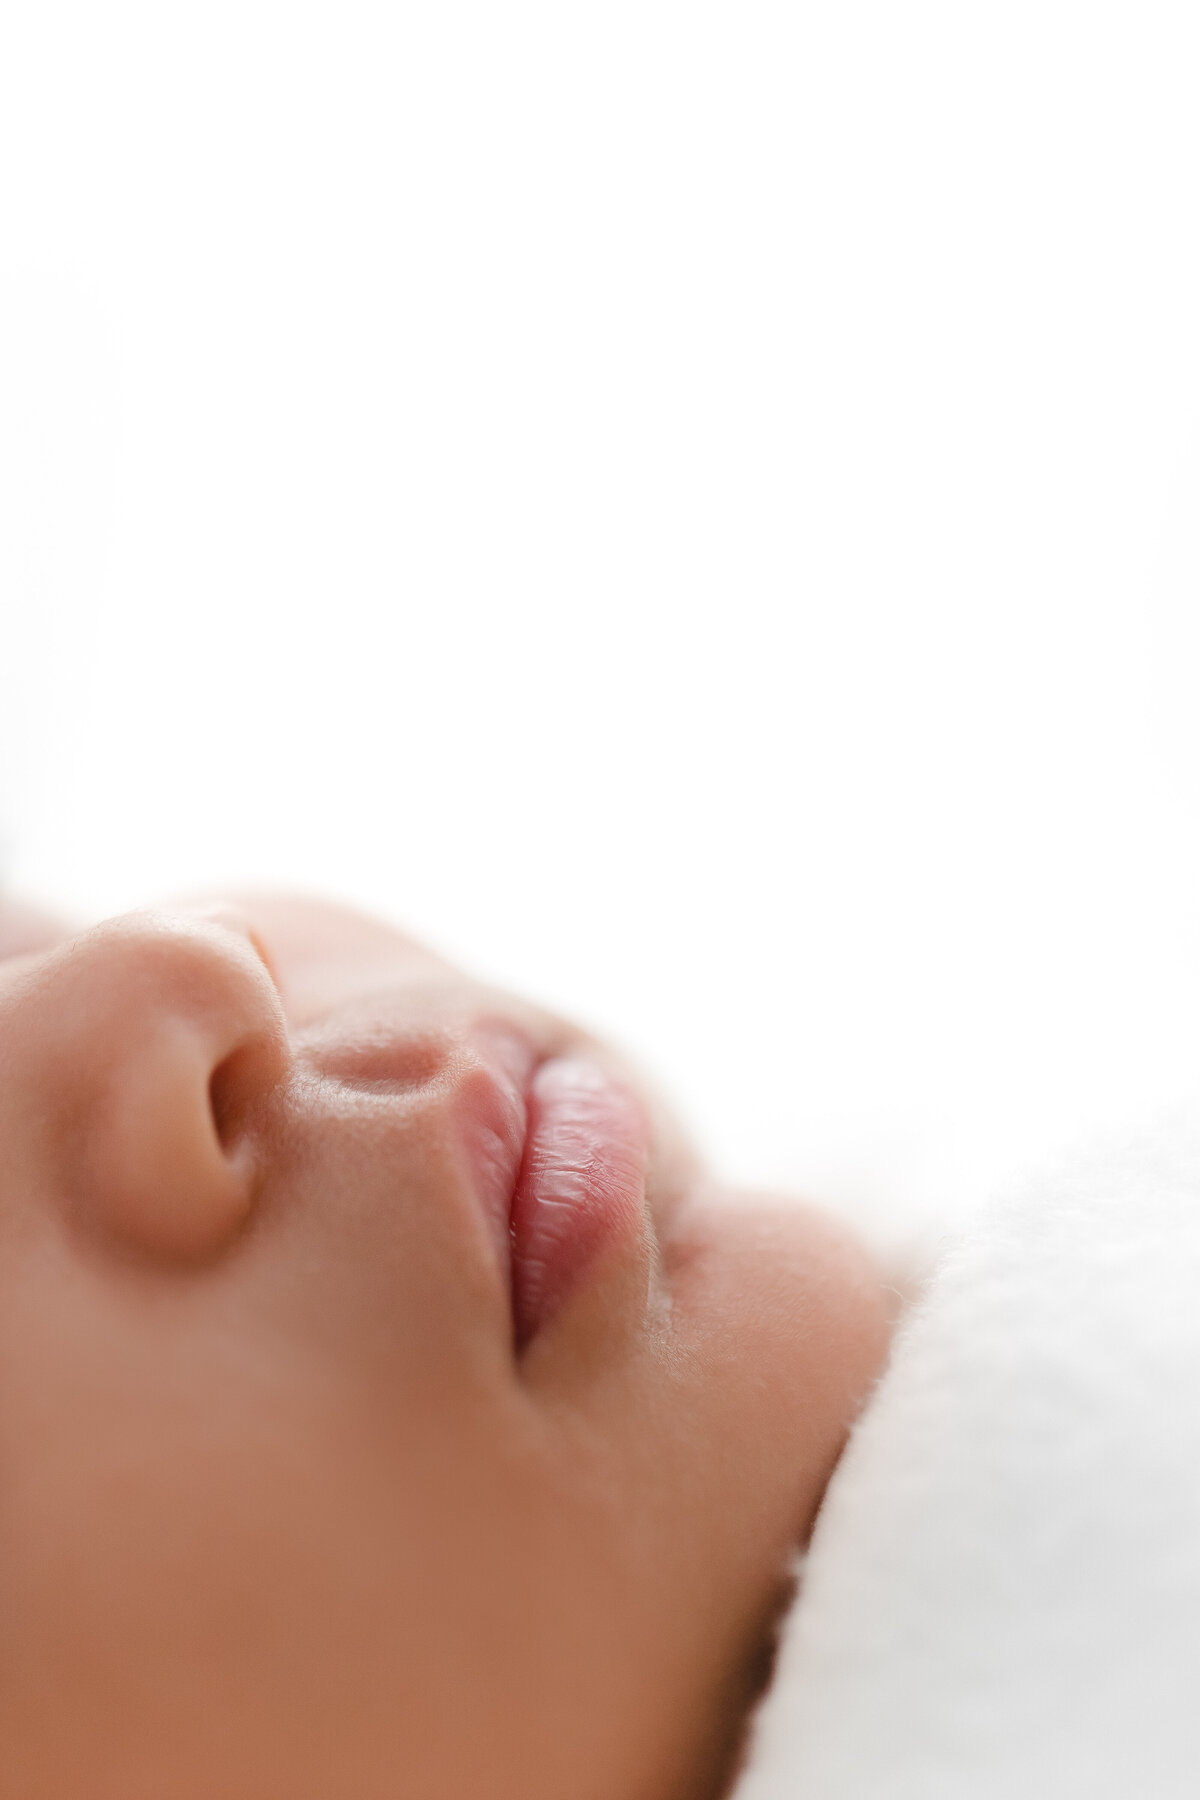 A closeup DC Newborn Photography photo of a baby girl's lips